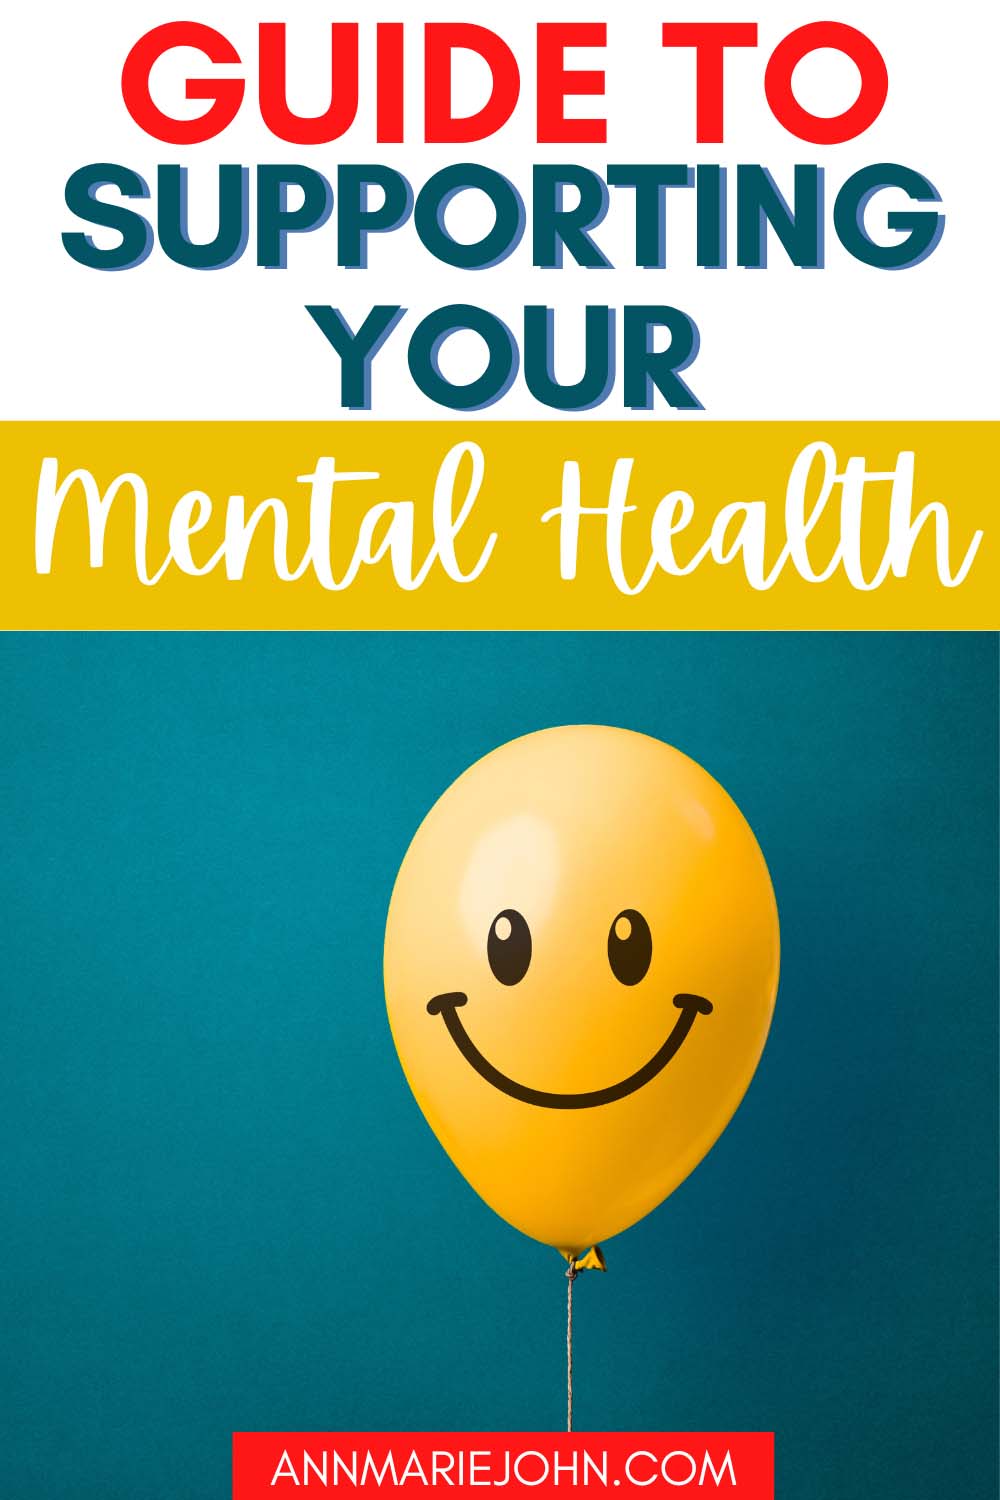 Guide to Supporting Your Mental Health